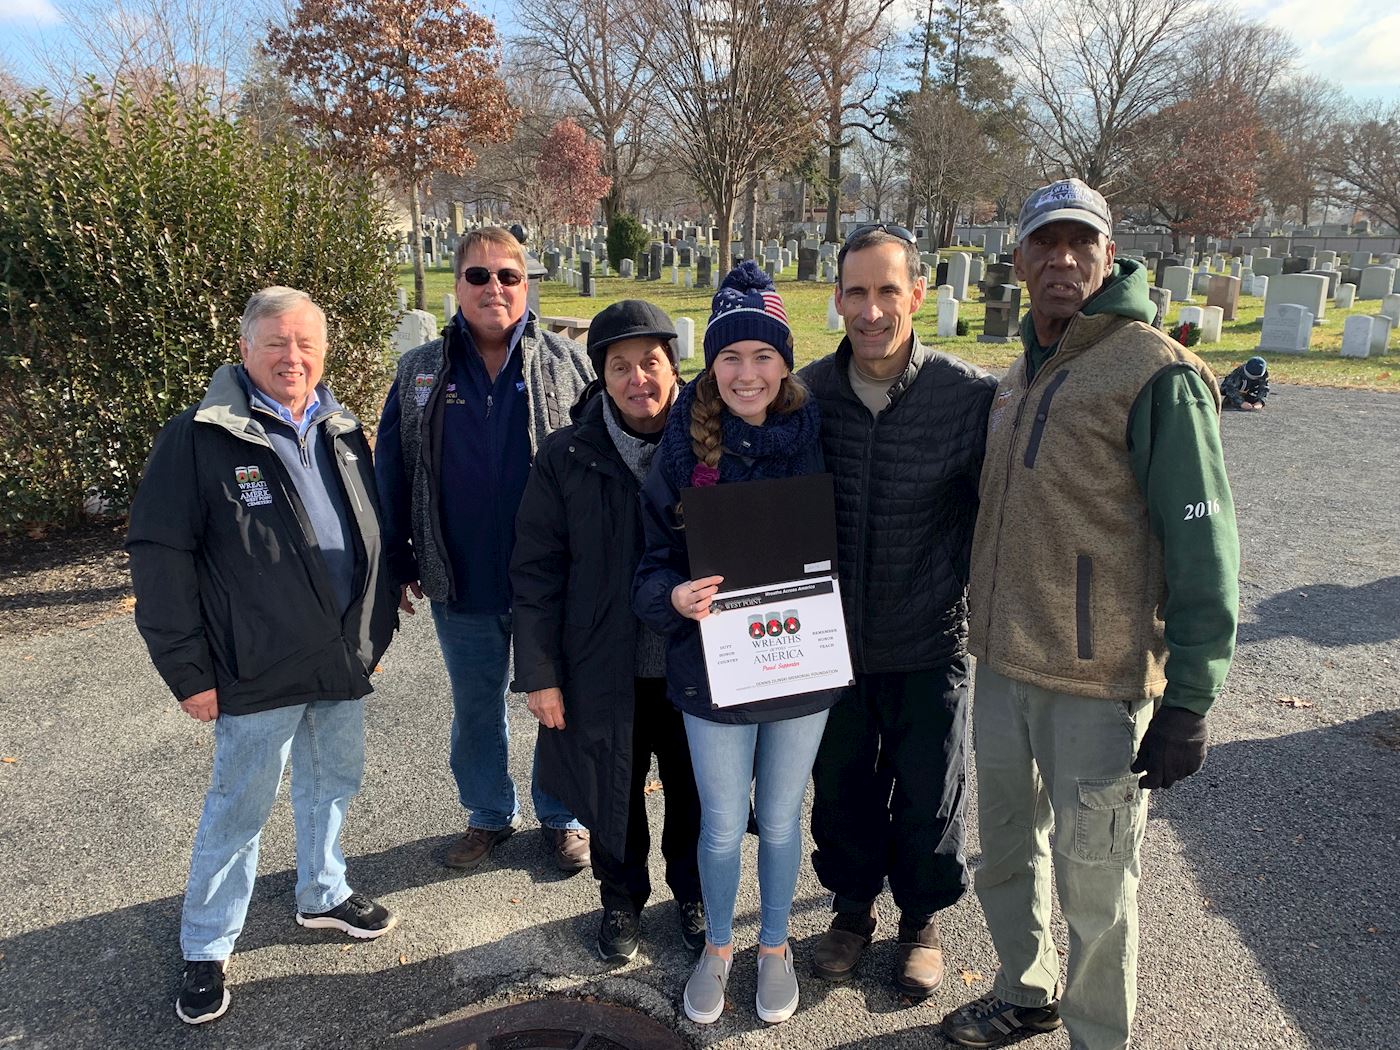 Jordan and Wreaths Across America truck drivers and coordinators. To the left of Jordan is Jackie McNally, the coordinator of WAA at West Point!